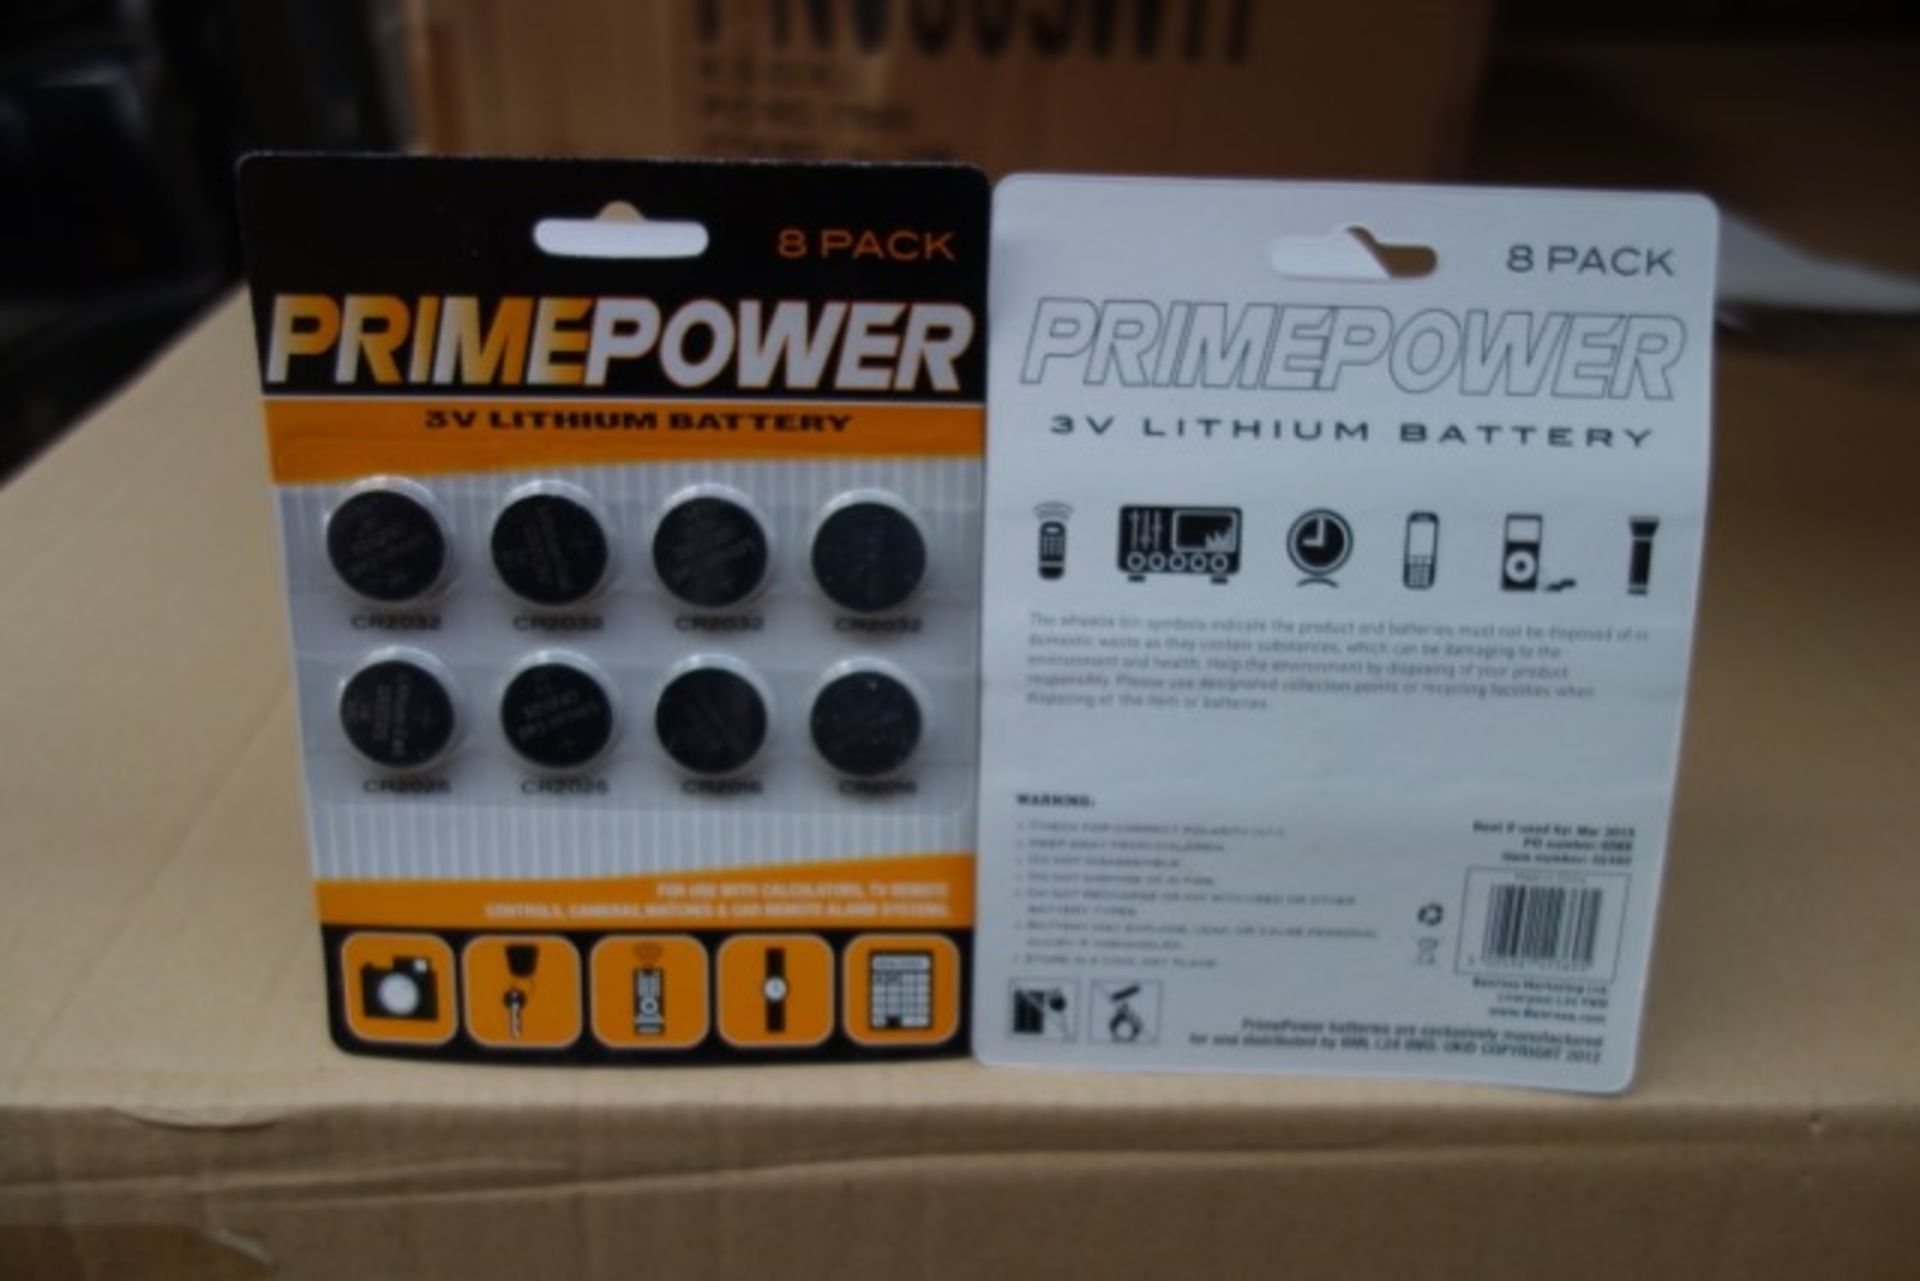 480 x Packs of 8 Primepower 3V Lithium Batteries. For use with calculators, TV remote controls, - Image 3 of 4